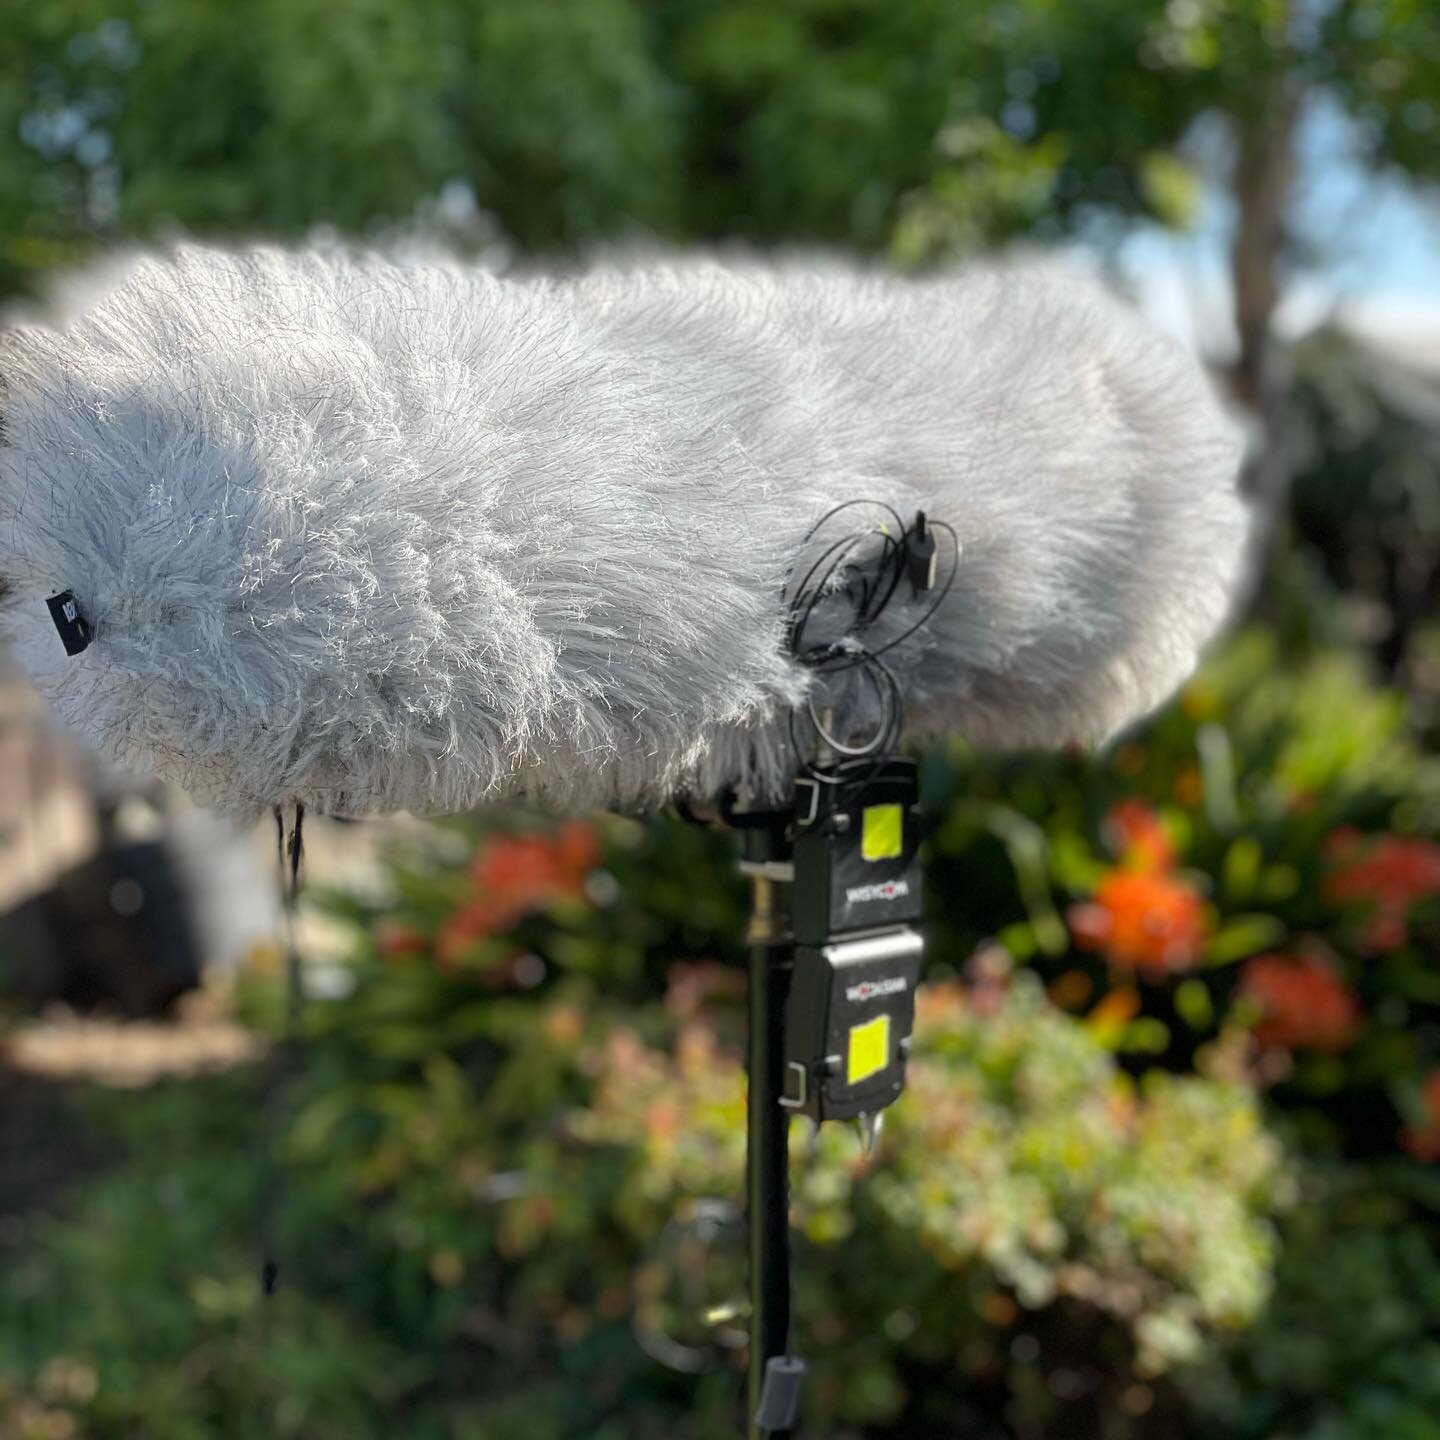 Finally a proper wind rig for the atomos #dpa mic. Sweet bird songs coming soon. Machine work by @alan_satalich